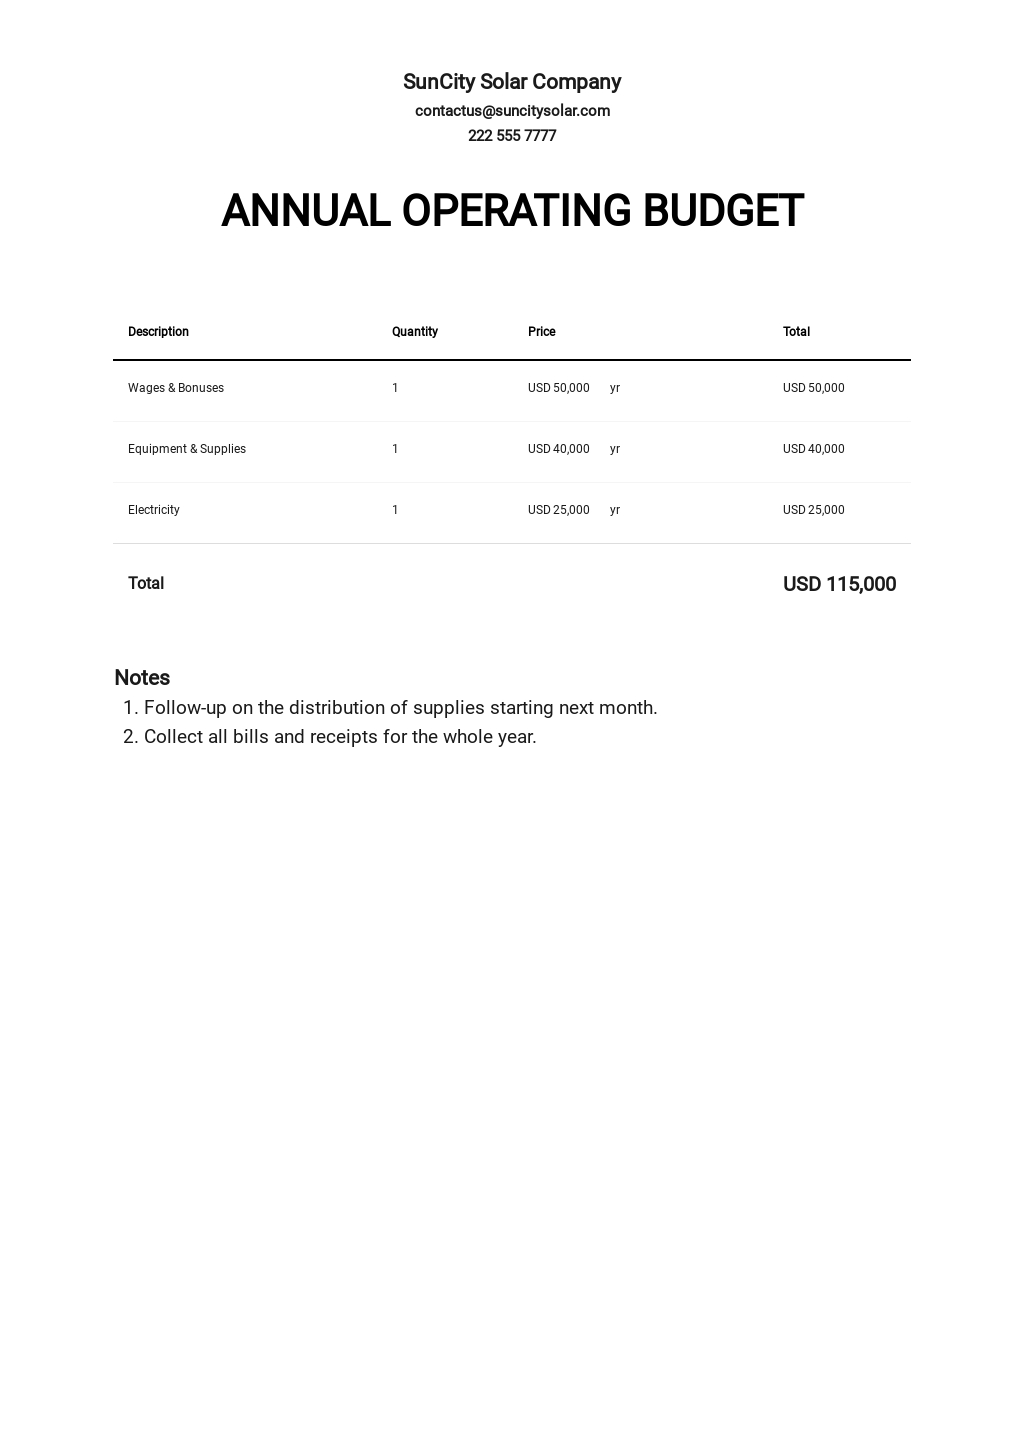 Annual Operating Budget Template in Google Docs, Google Sheets, Excel